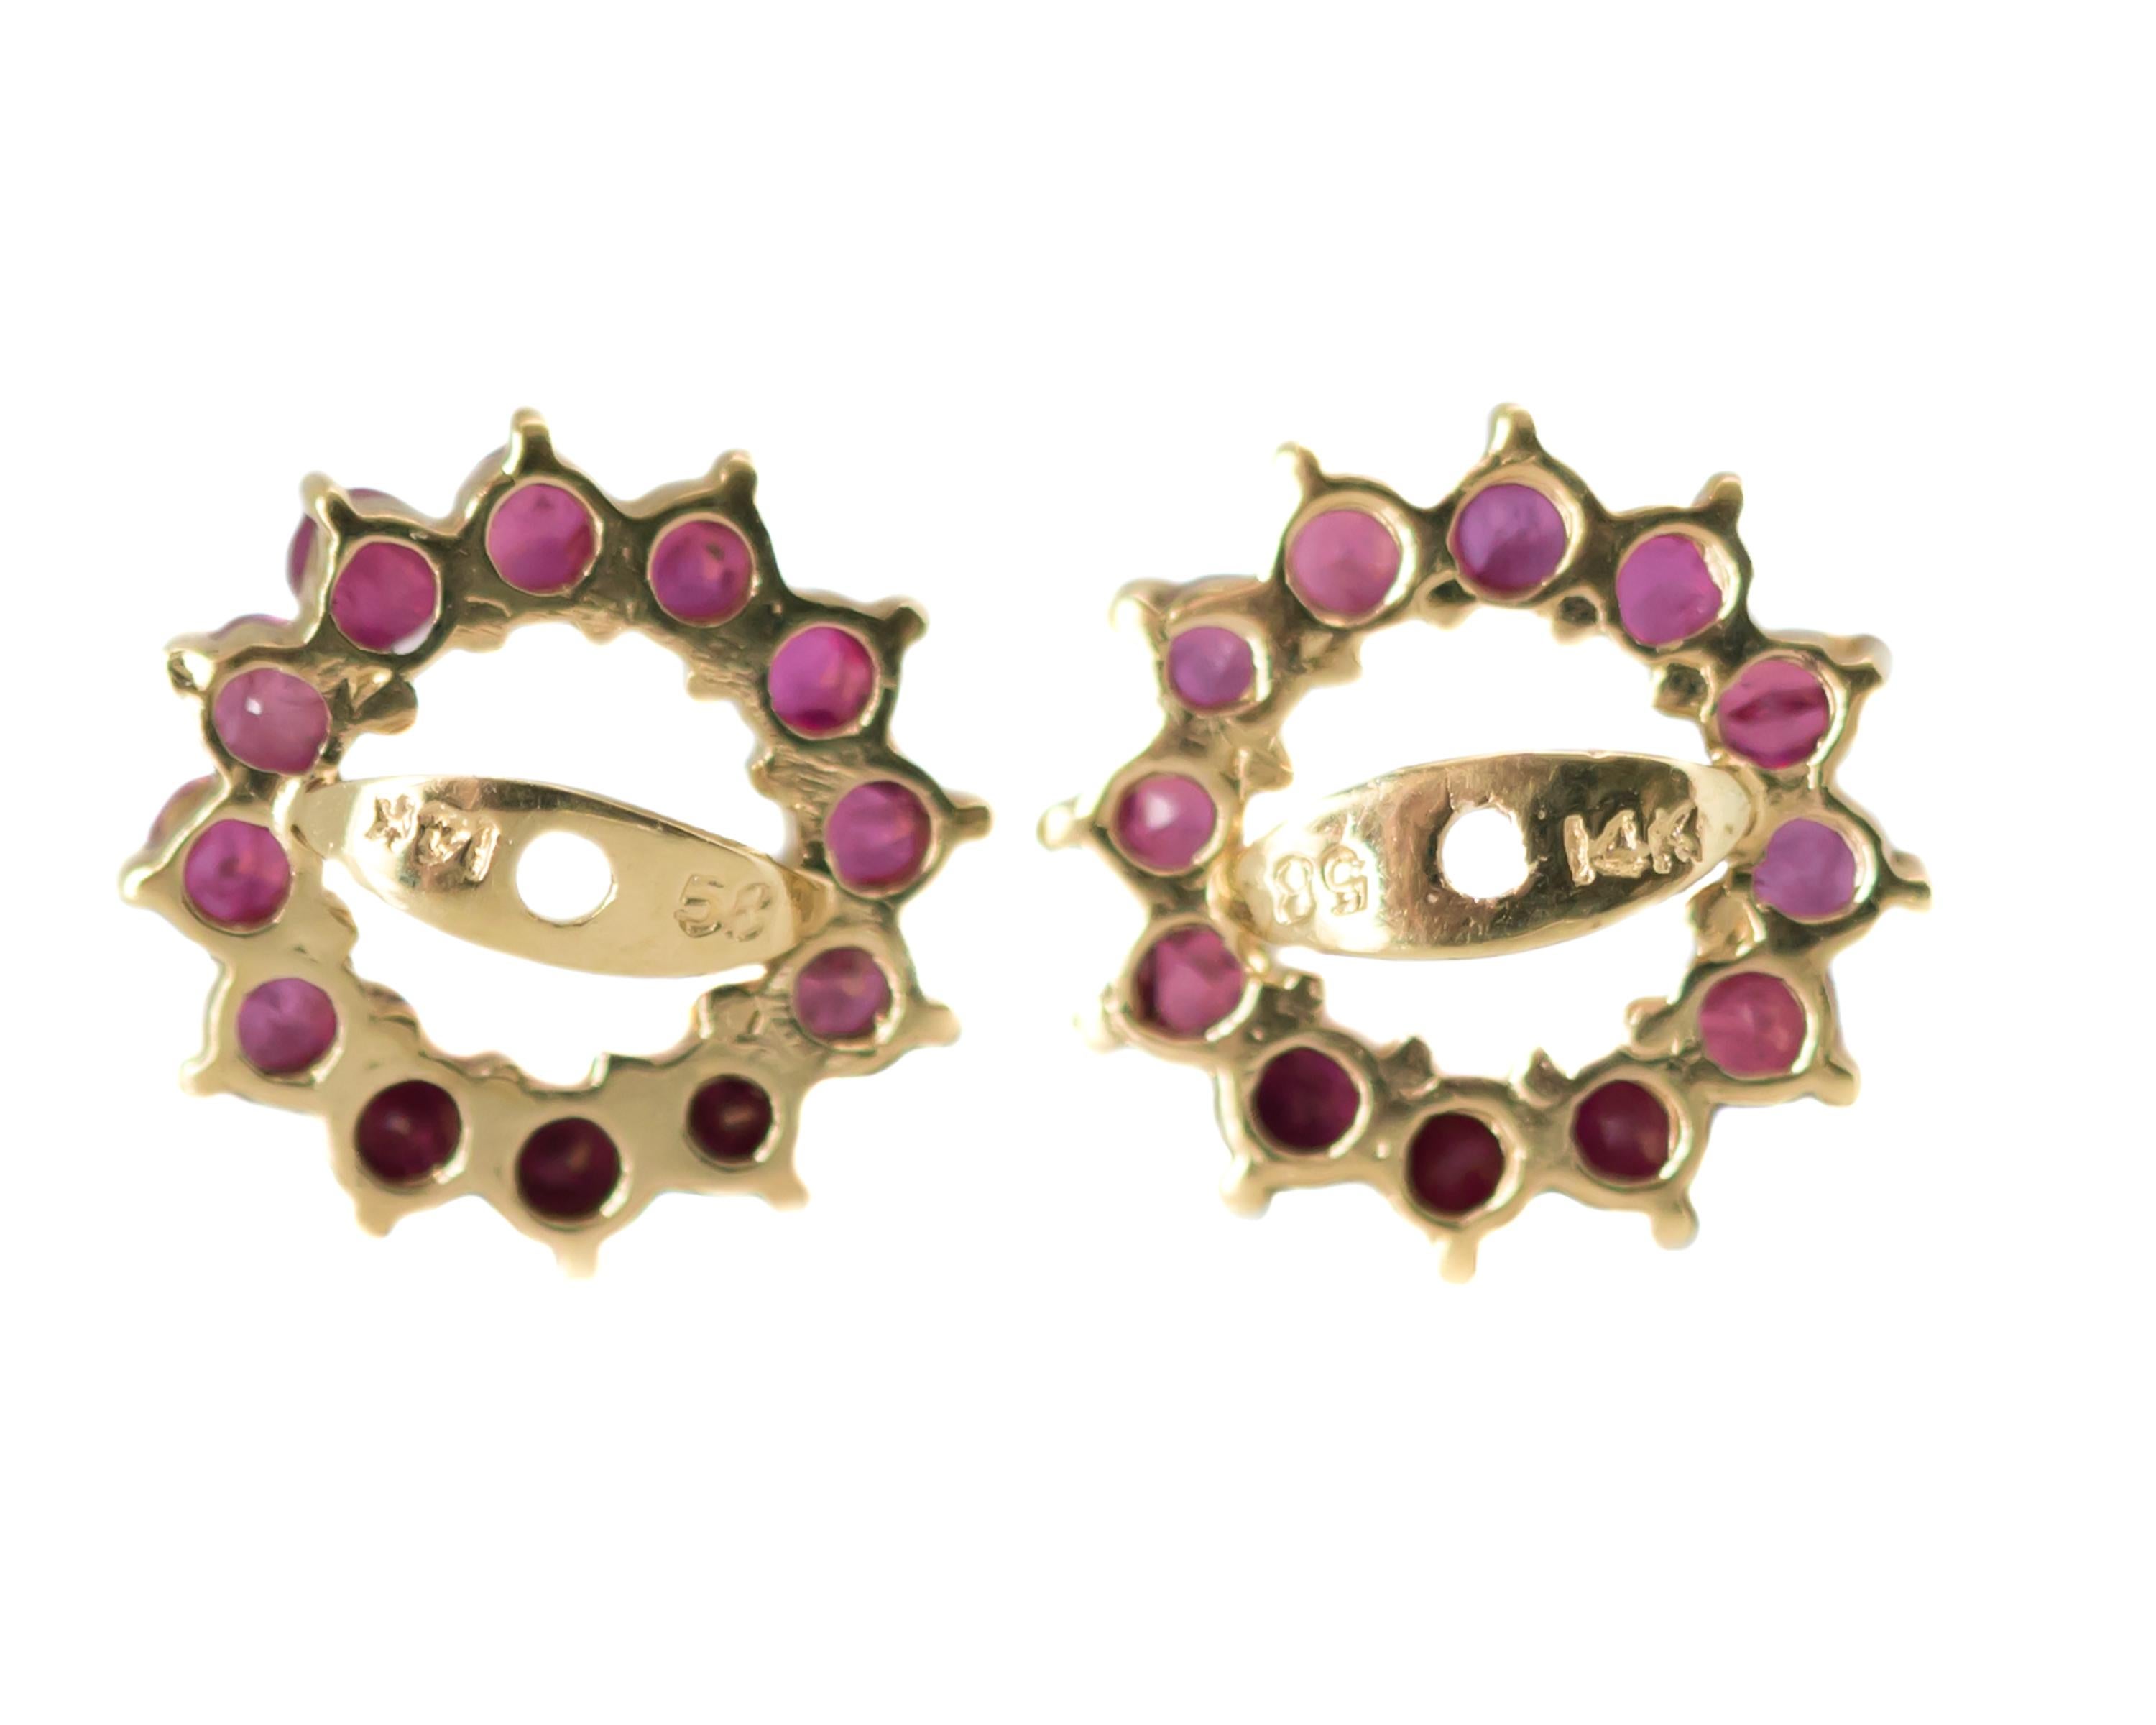 1950s Retro Ruby Earring Jackets - 14 Karat Yellow Gold, Rubies

Features:
0.25 carats total weight Rubies
12 round Rubies per jacket, total 24 Rubies
14 Karat Yellow Gold setting
Prong set Stones
11 millimeters wide
Jackets fit a 0.75 - 1.0 carat